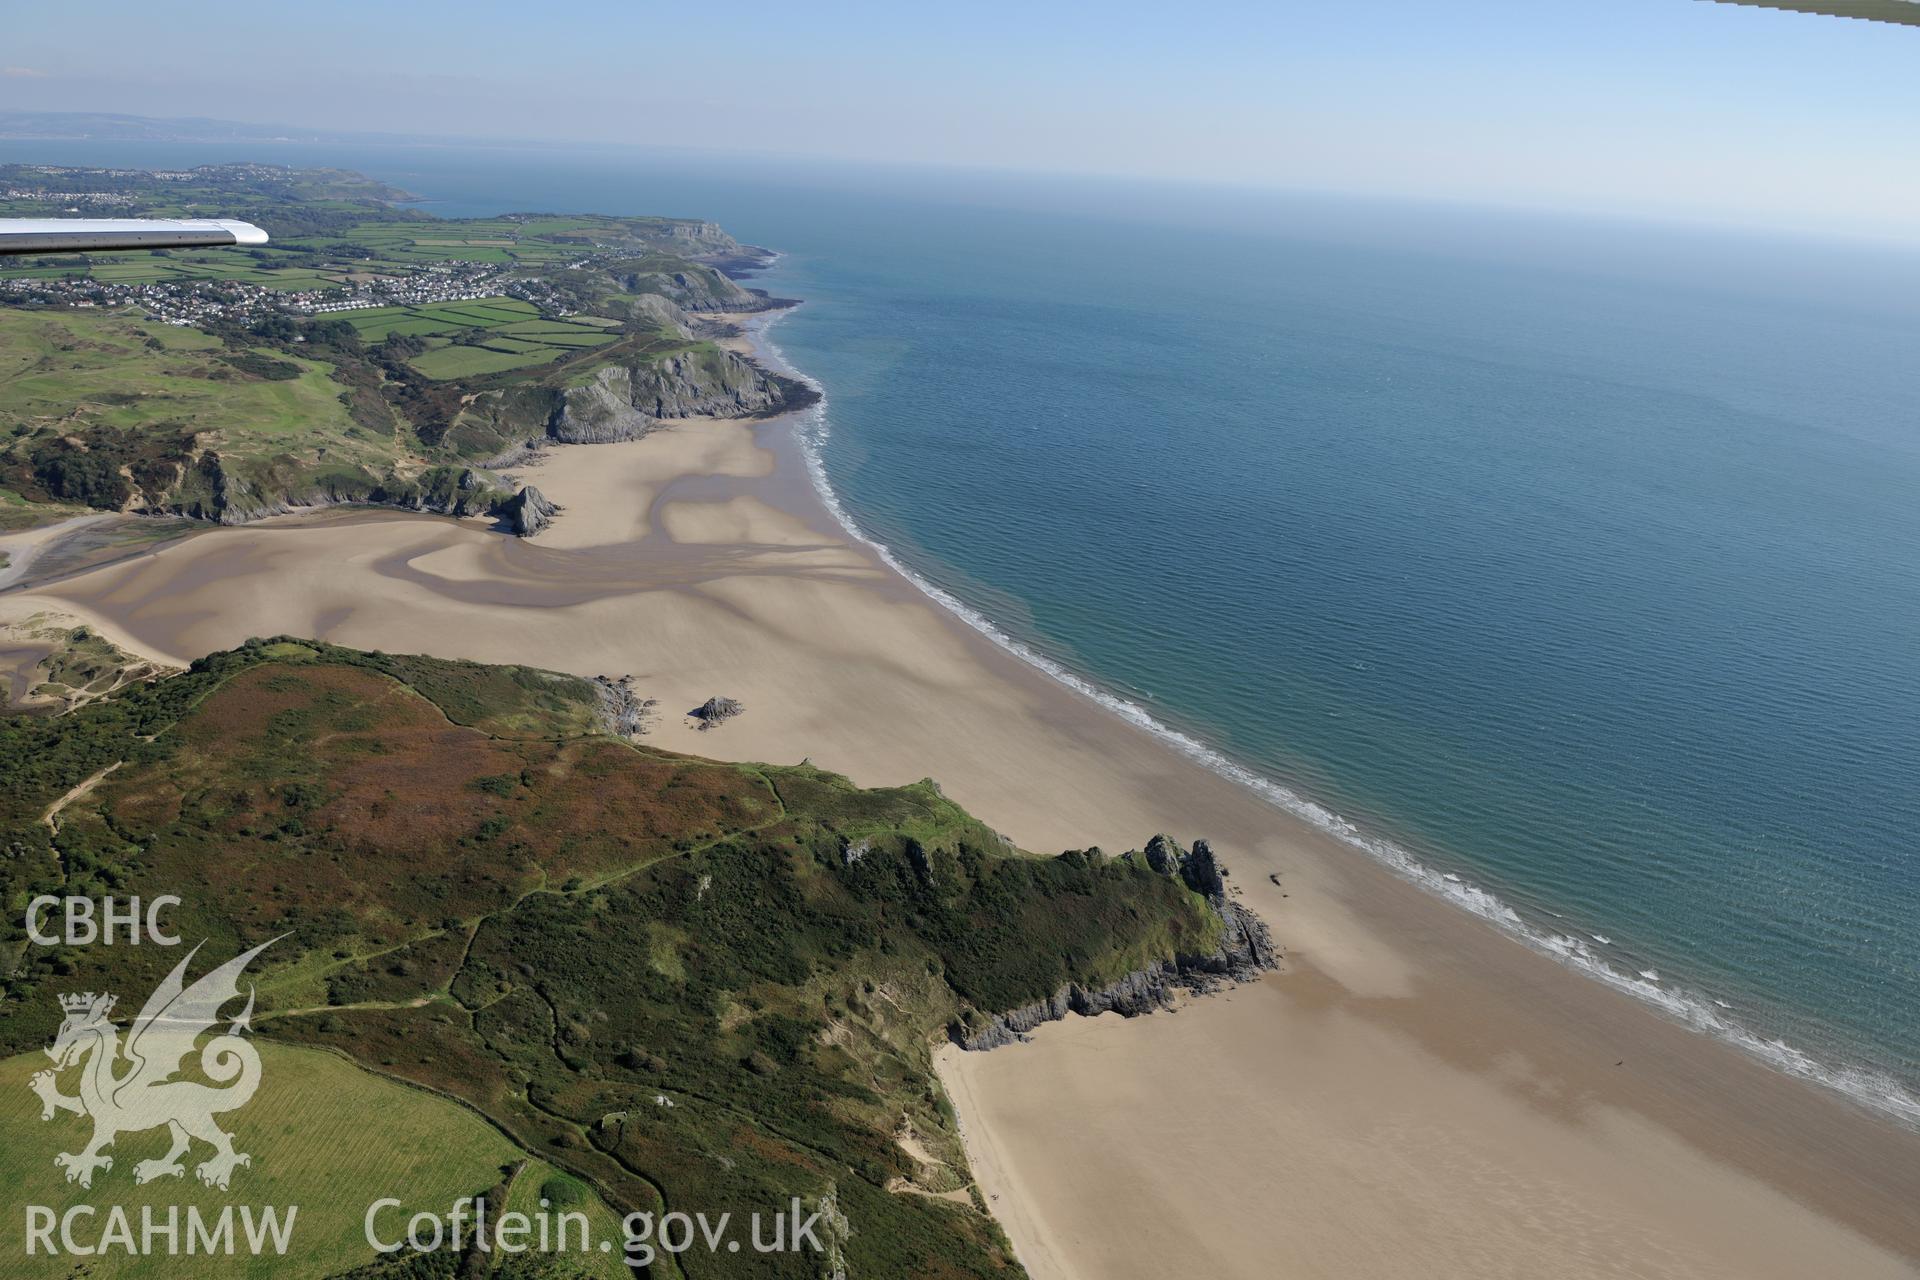 Threecliffs Bay and the pillowmound on the Great Tor Headland, on the southern coast of the Gower Peninsula. Oblique aerial photograph taken during the Royal Commission's programme of archaeological aerial reconnaissance by Toby Driver on 30th September 2015.